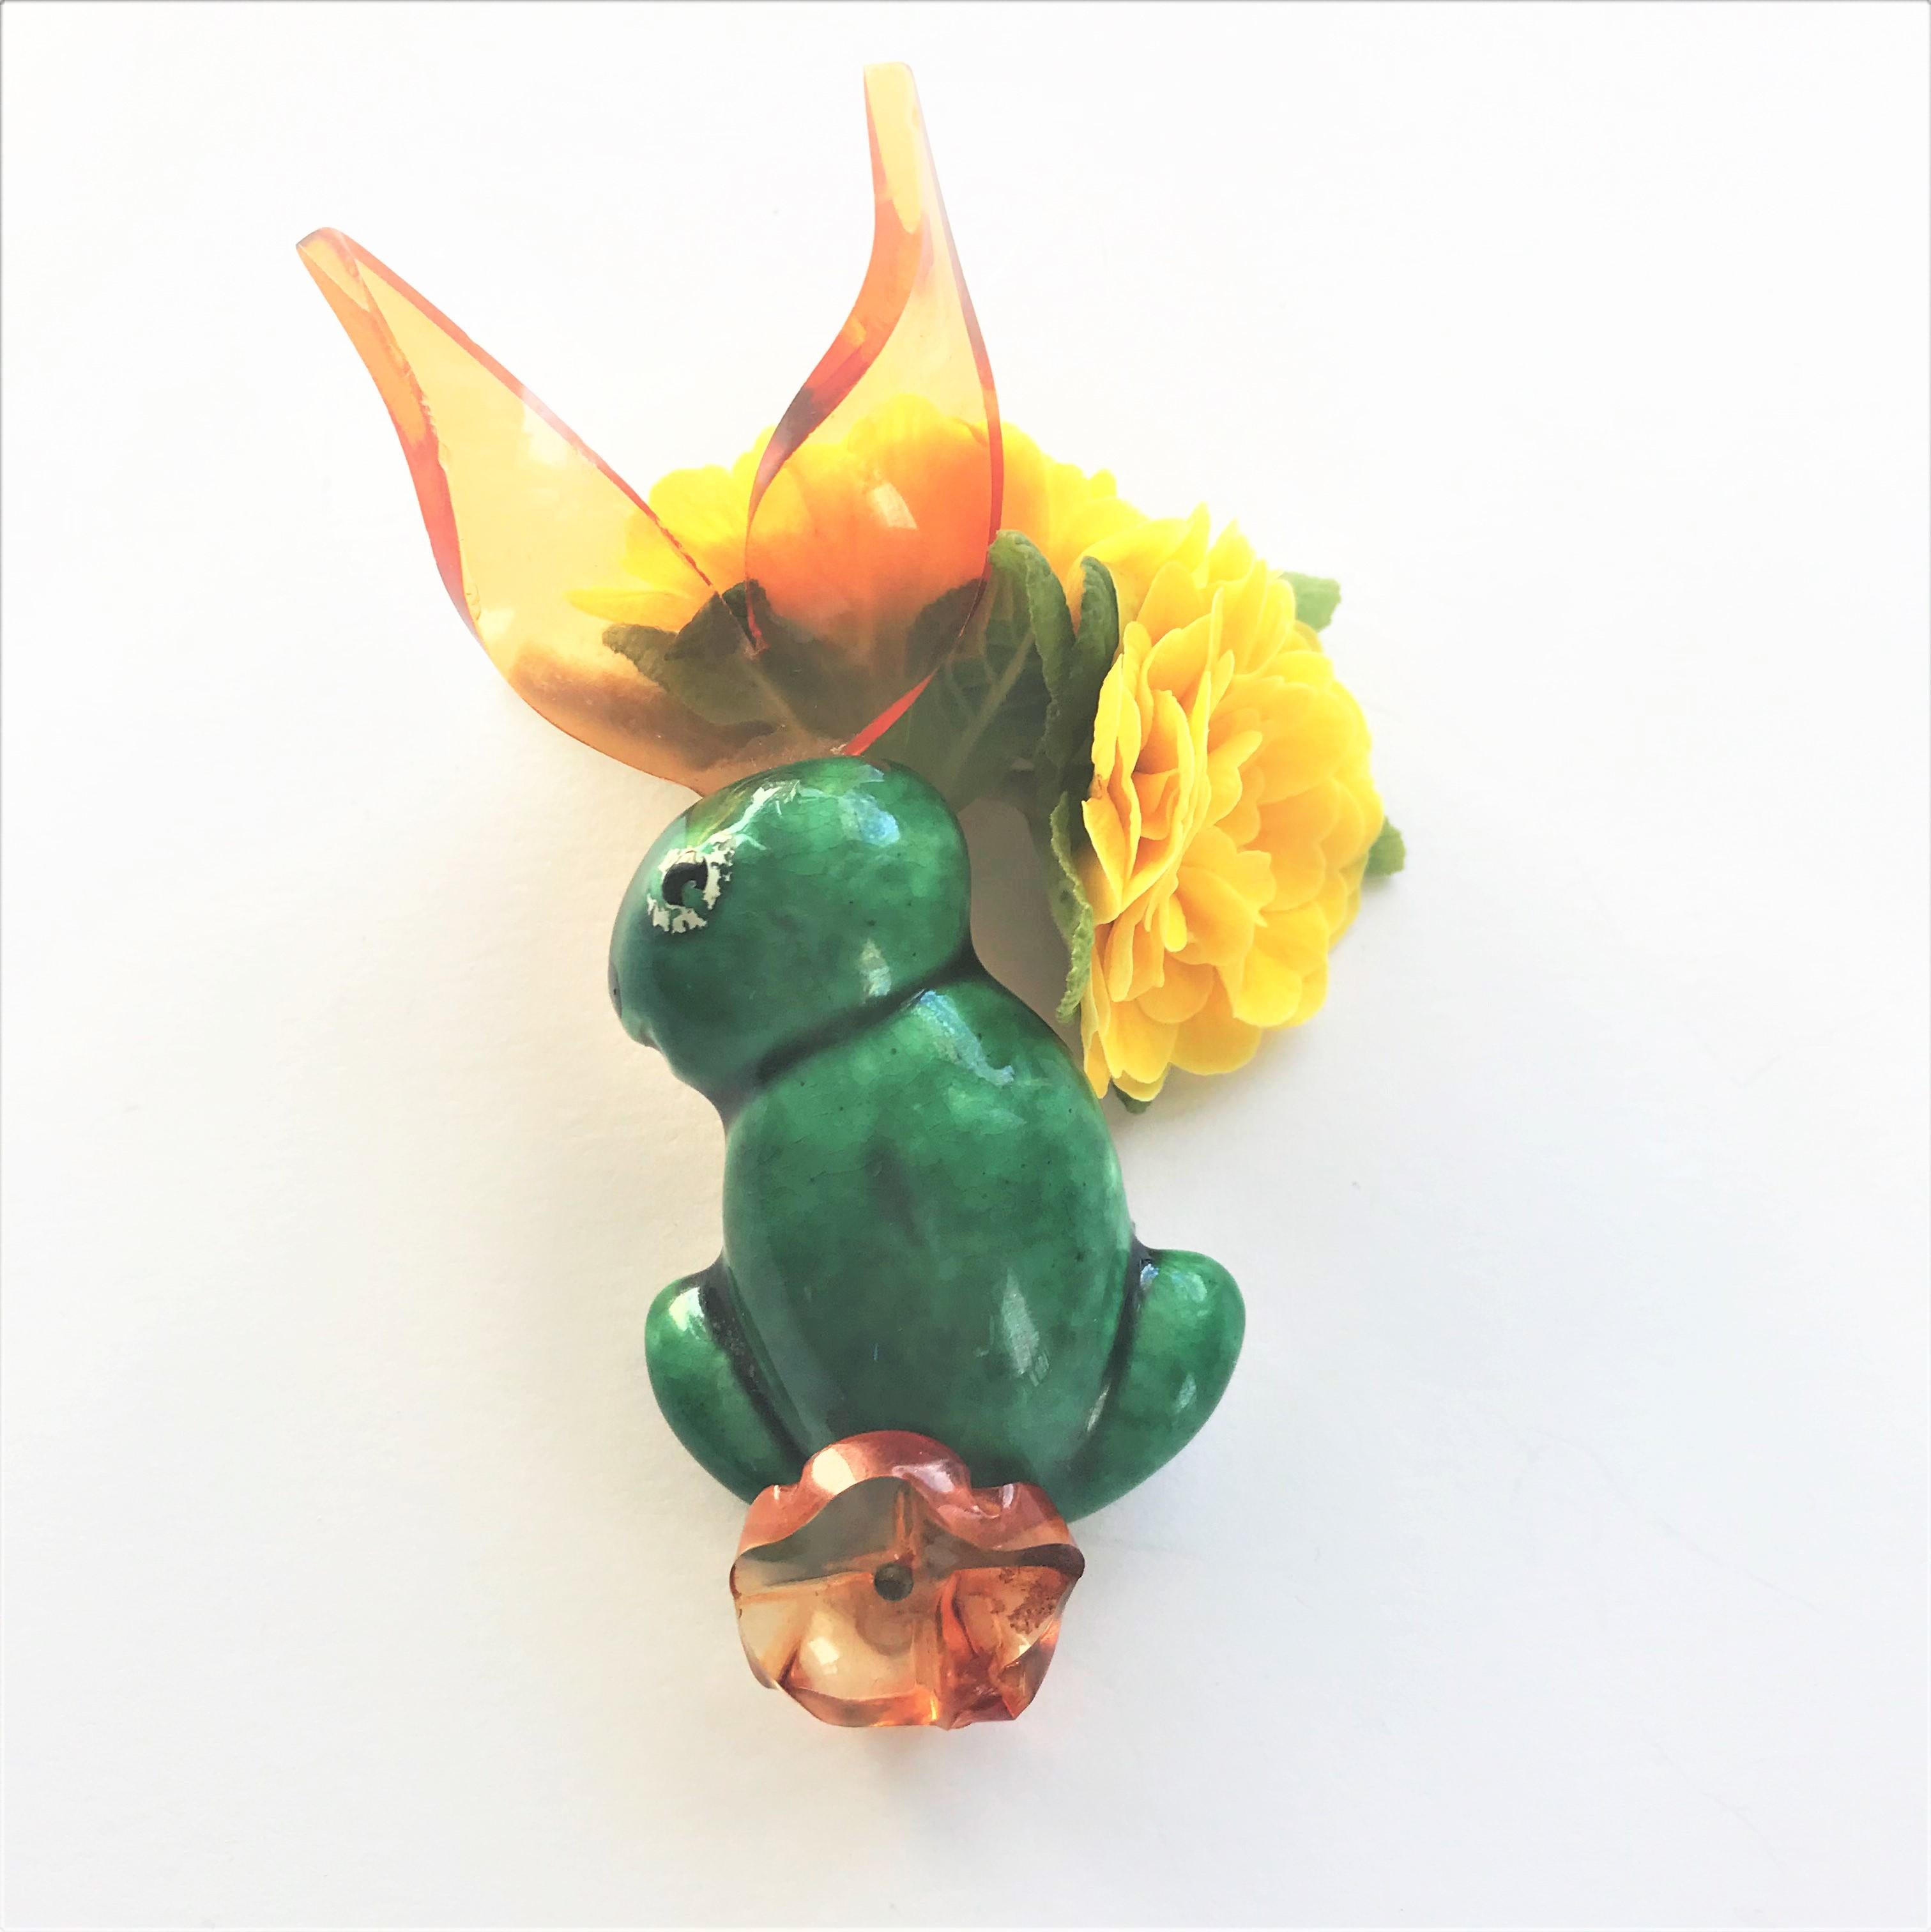 HAPPY EASTER !
hand painted ceramic brooch - yellow lucite, green, black white enamel presents a rabbit with long ears 10 cm x 3  x 1,5 cm thick

Manufacturer Elzac, Inc., Los Angeles, Designer Elliot Handler   shown in 'A ATRIBUT TO AMERCA'  